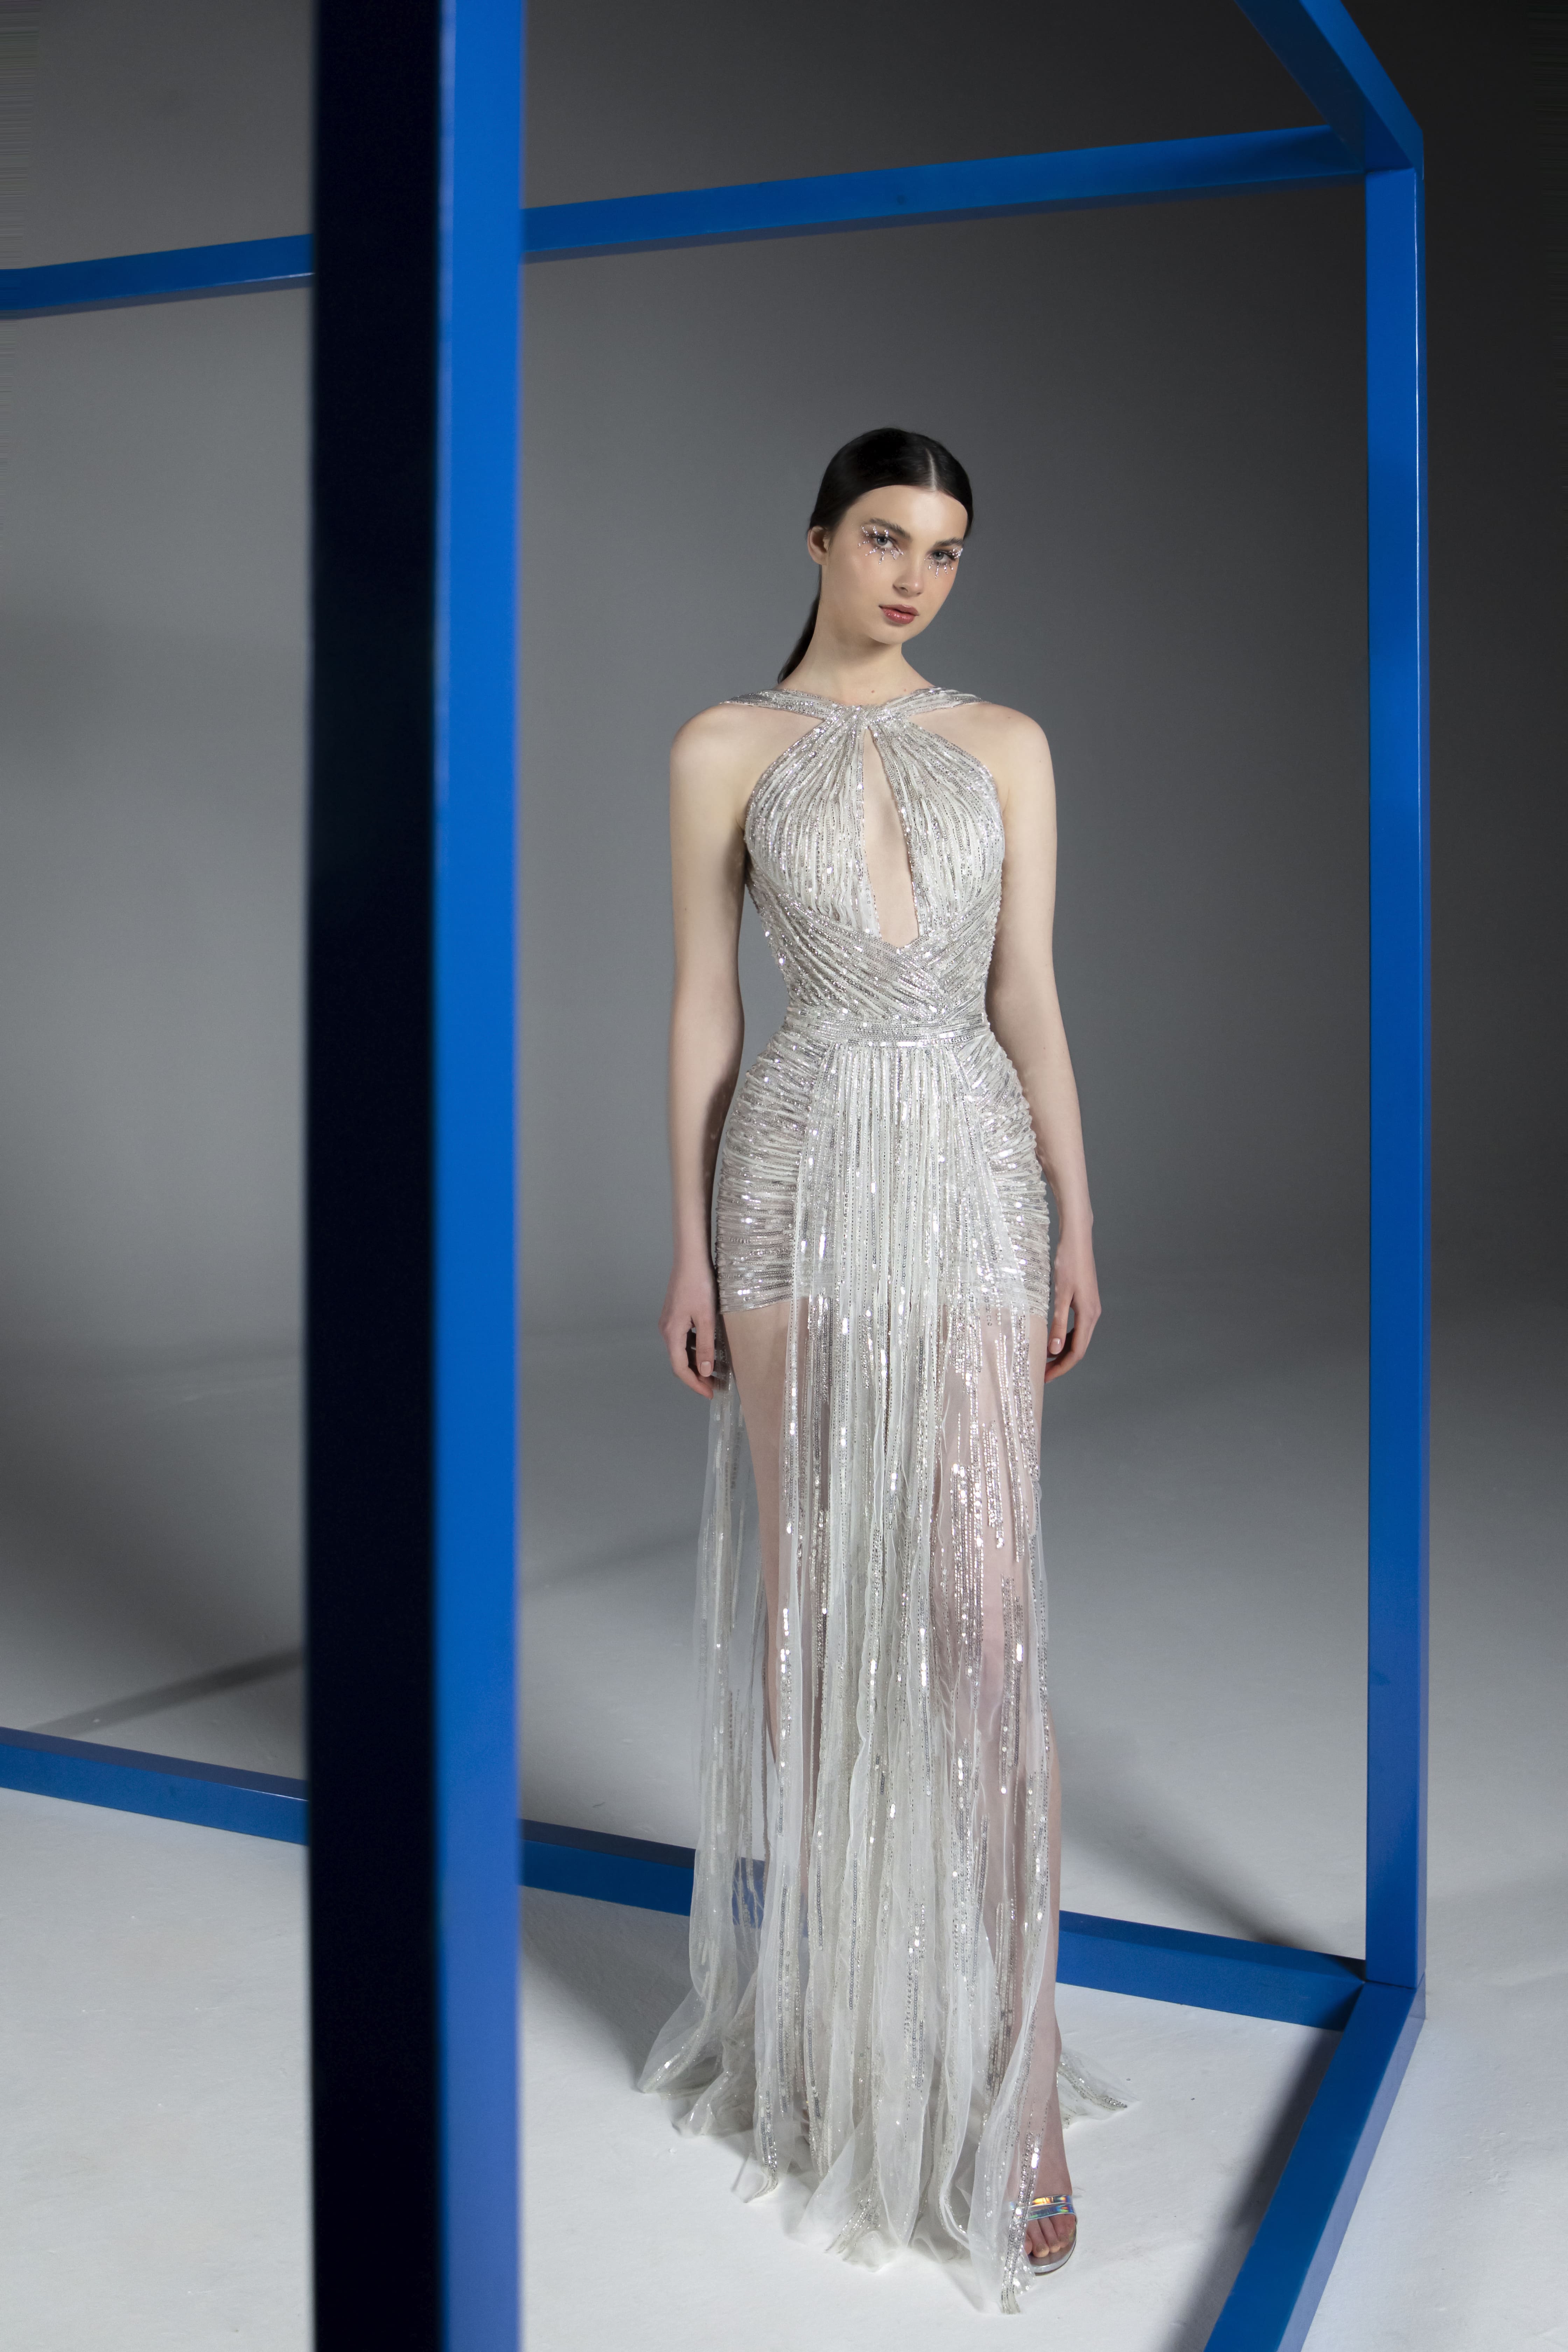 SS21-7 Silver draped gown embroidered with sequins, cut beads and swarovski crystals featuring a plunging necklinee-min